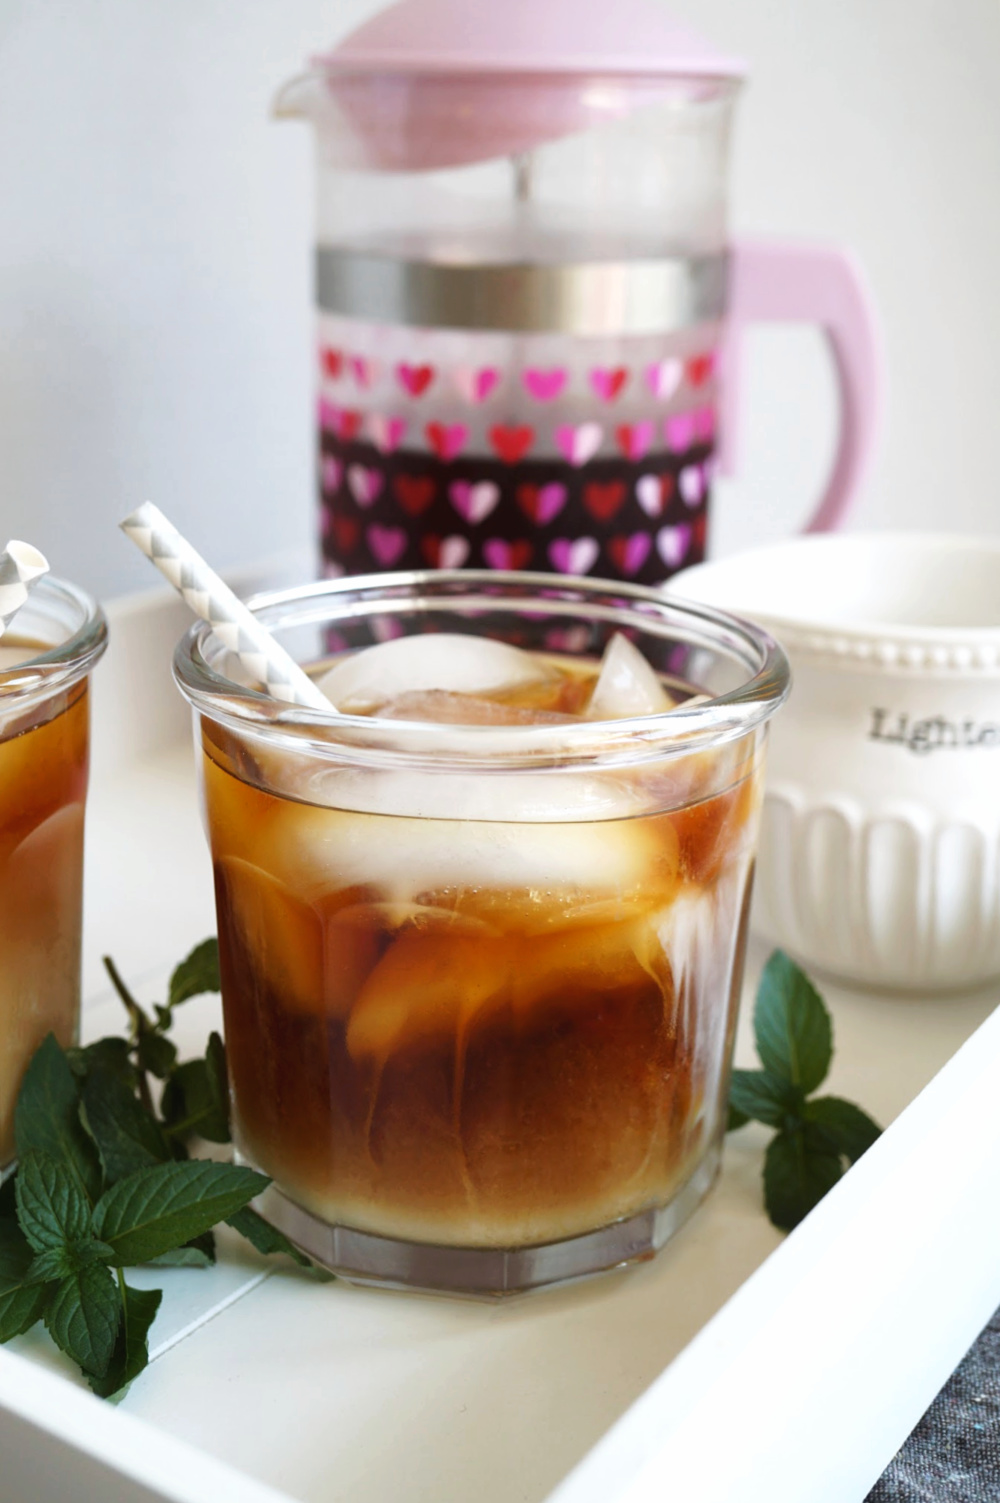 French Press Cold Brew: Easy Recipe and Guide